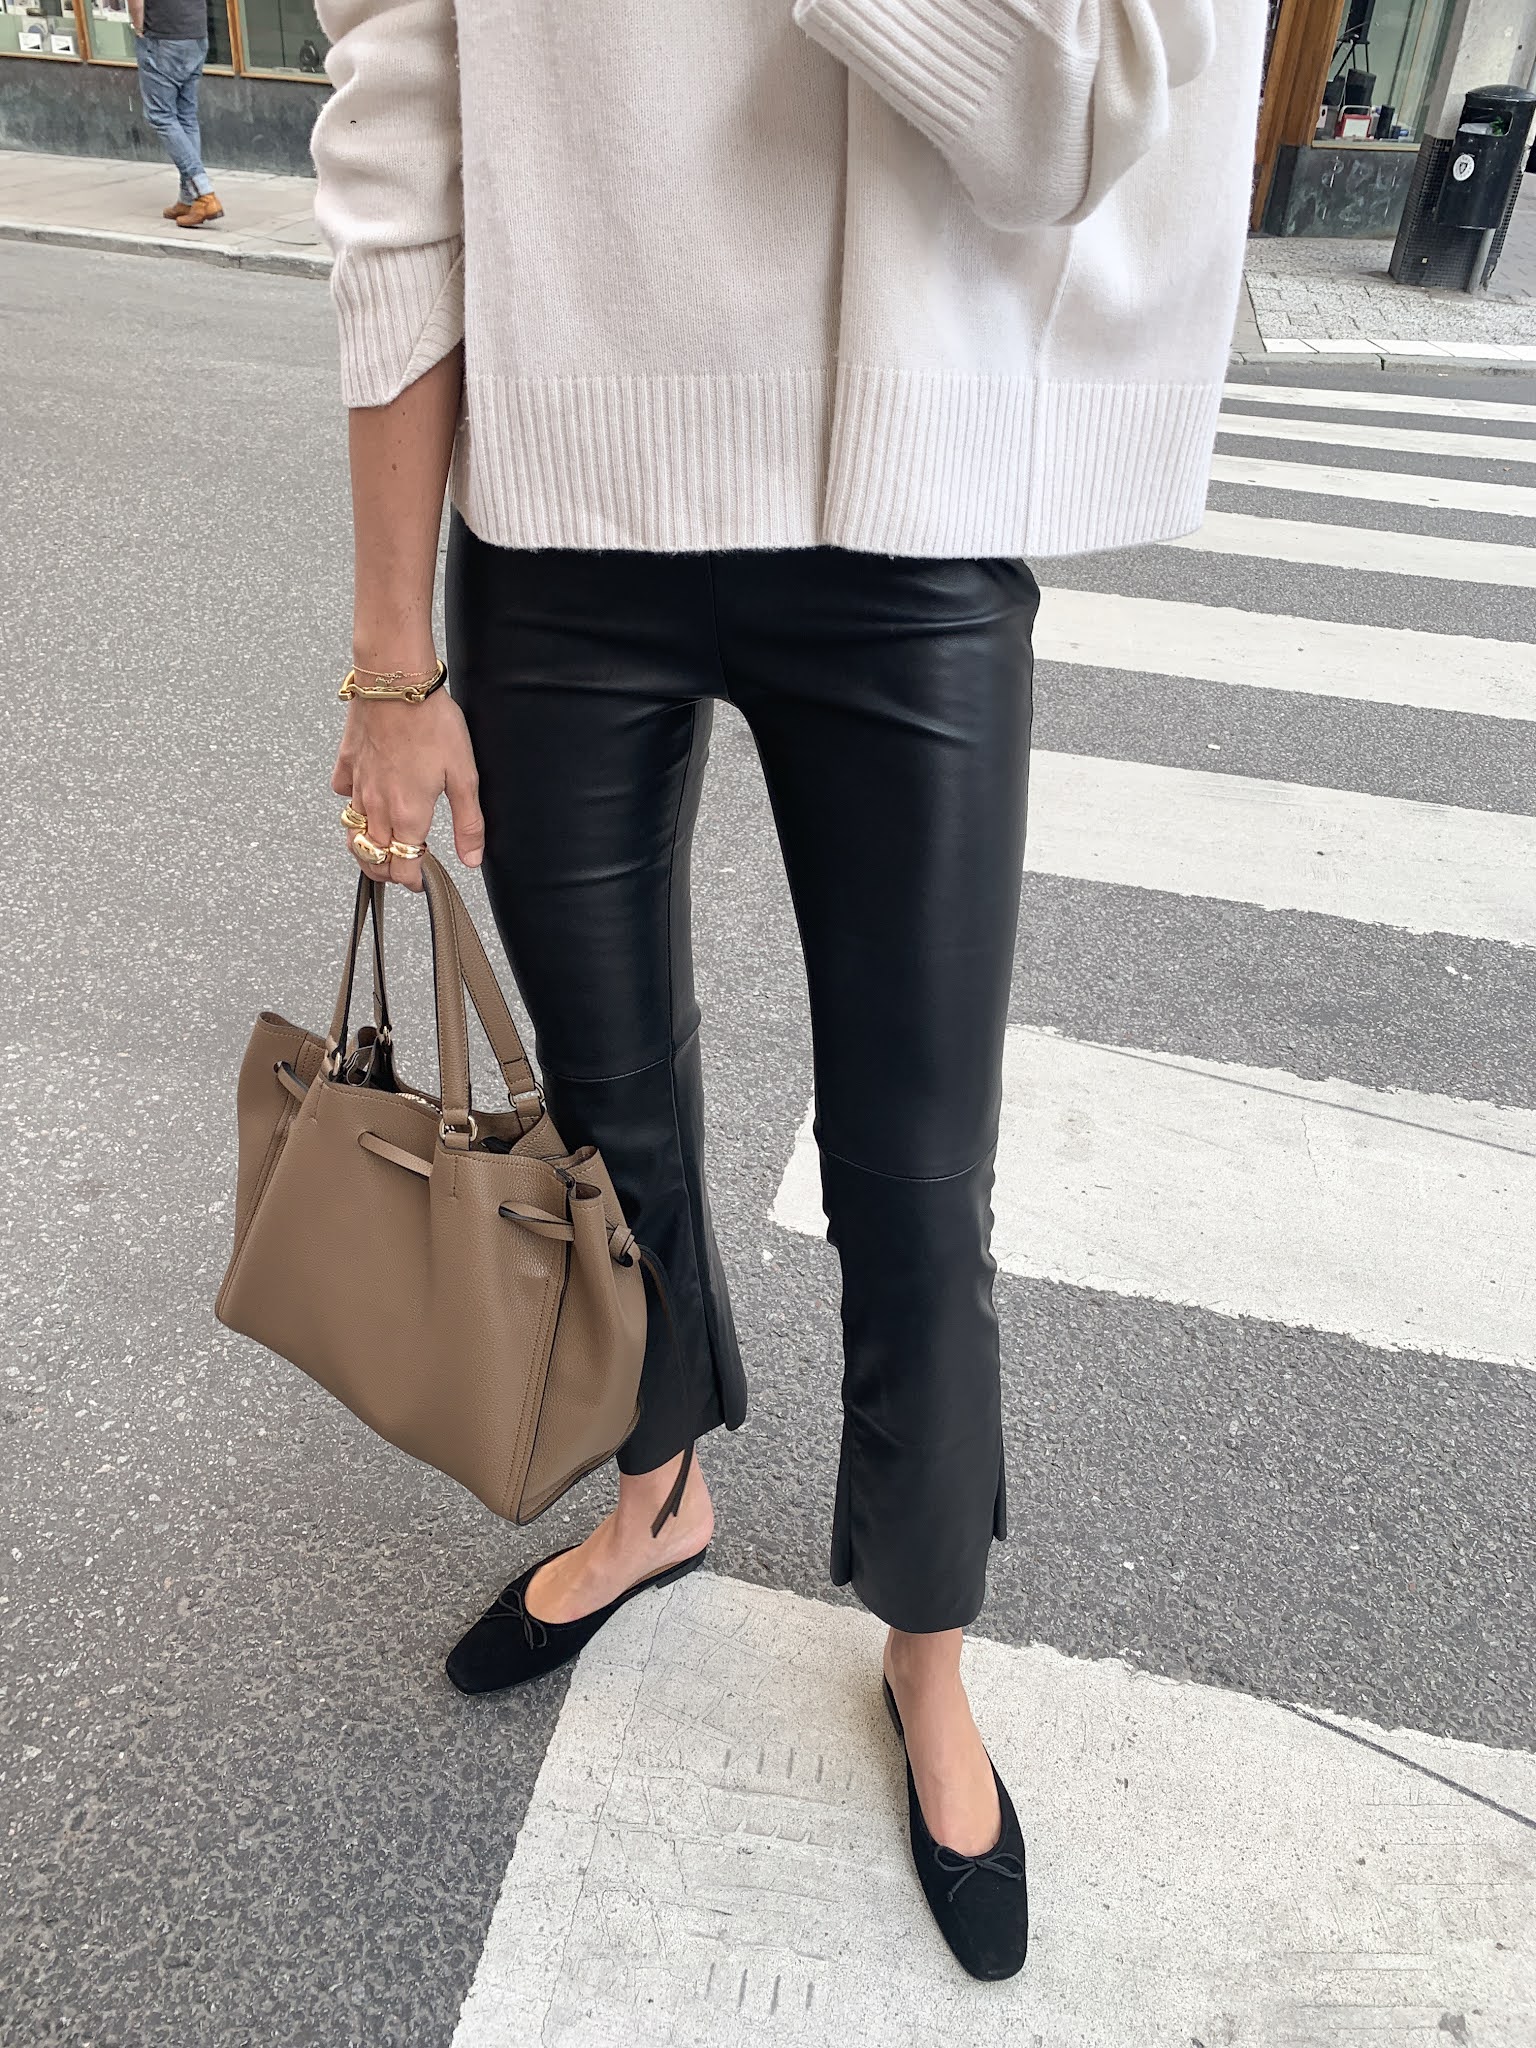 Best Black Flats — Fall outfit idea with a cream sweater, leather pants, and Manolo Blahnik mule flats